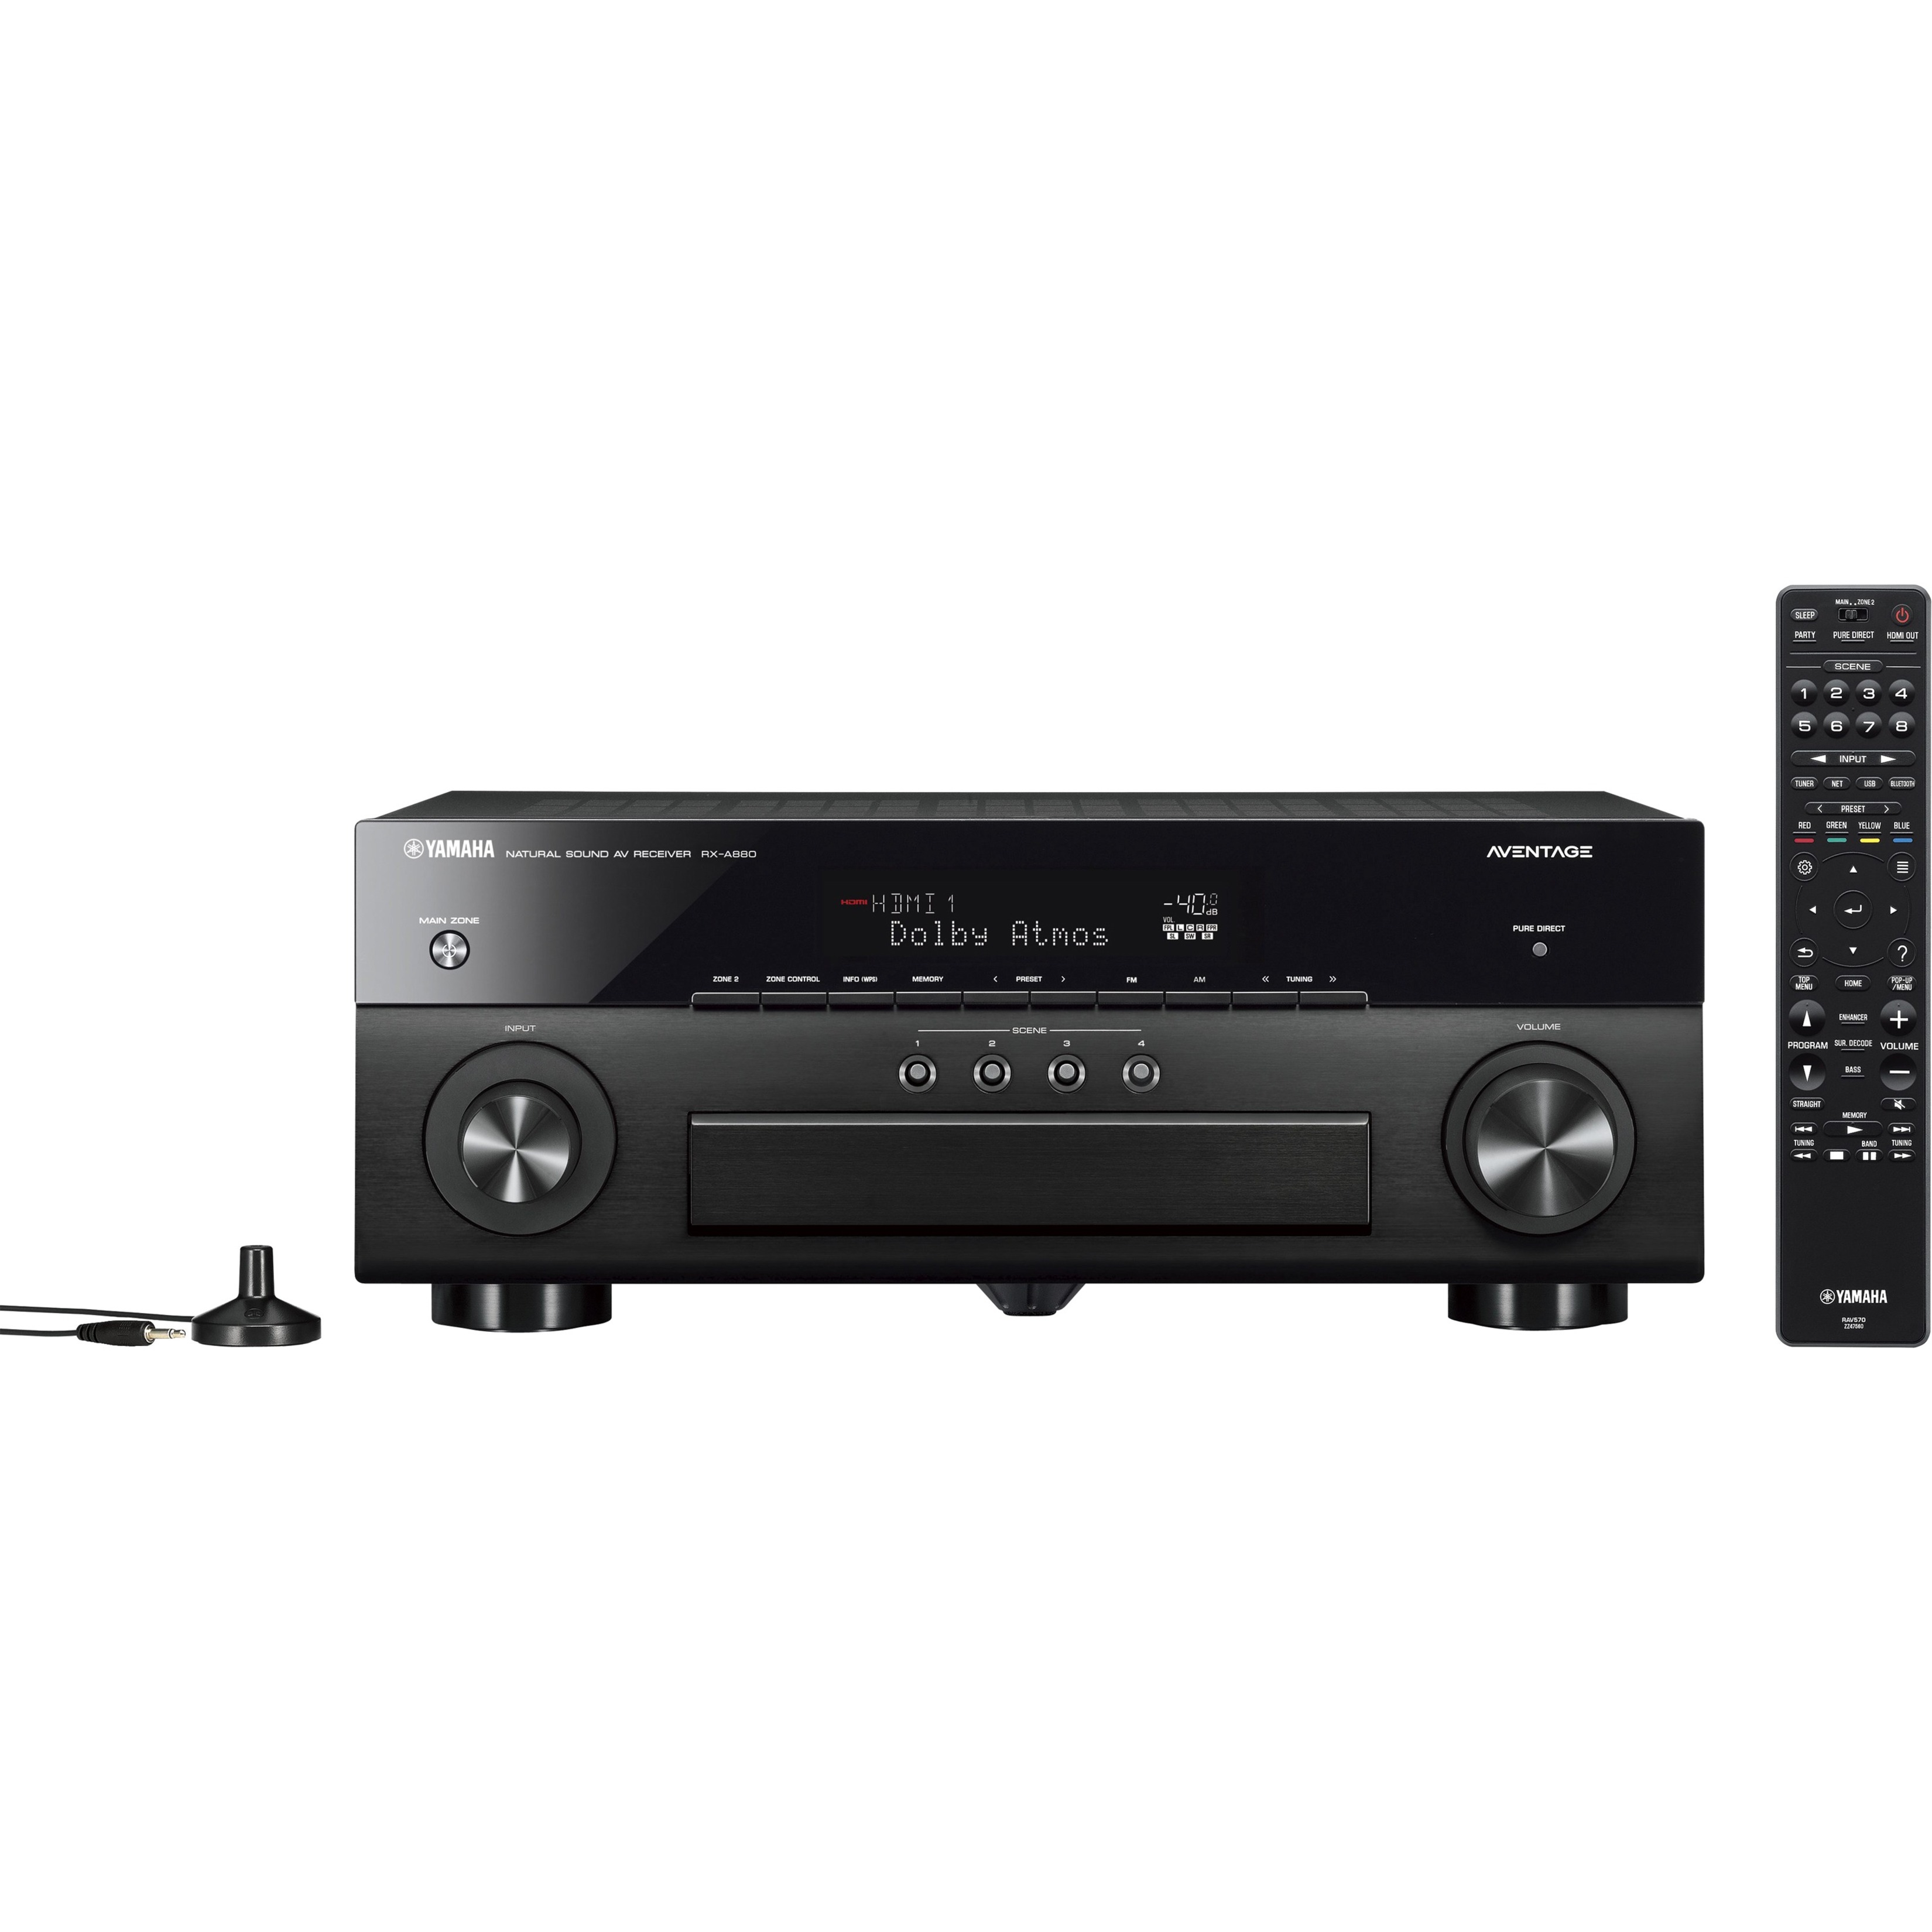 Yamaha RX-A880 Premium Audio & Video Component Receiver - image 1 of 7